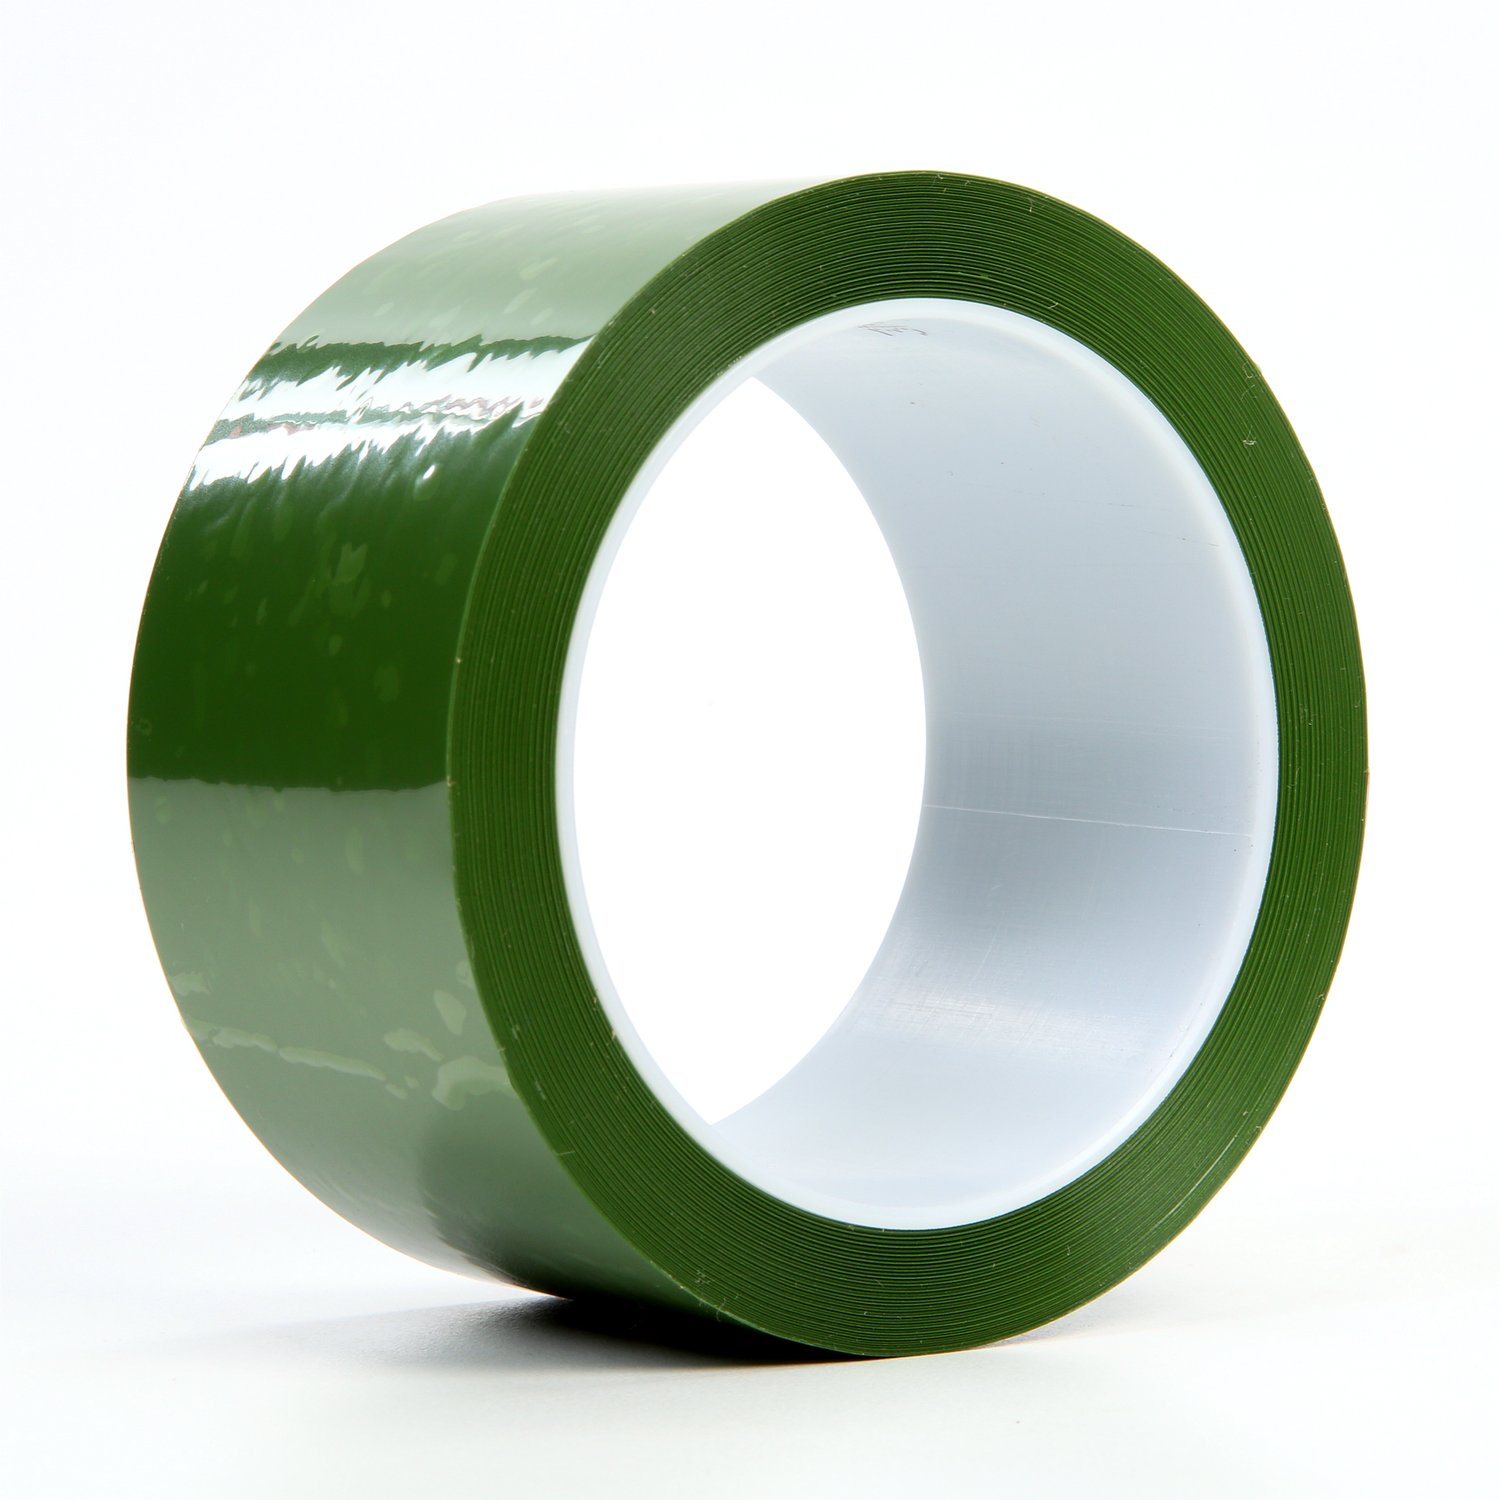 7010373108 - 3M Polyester Tape 8402, Green, 1.9 mil, 48 in x 72 yd, 1 roll per case